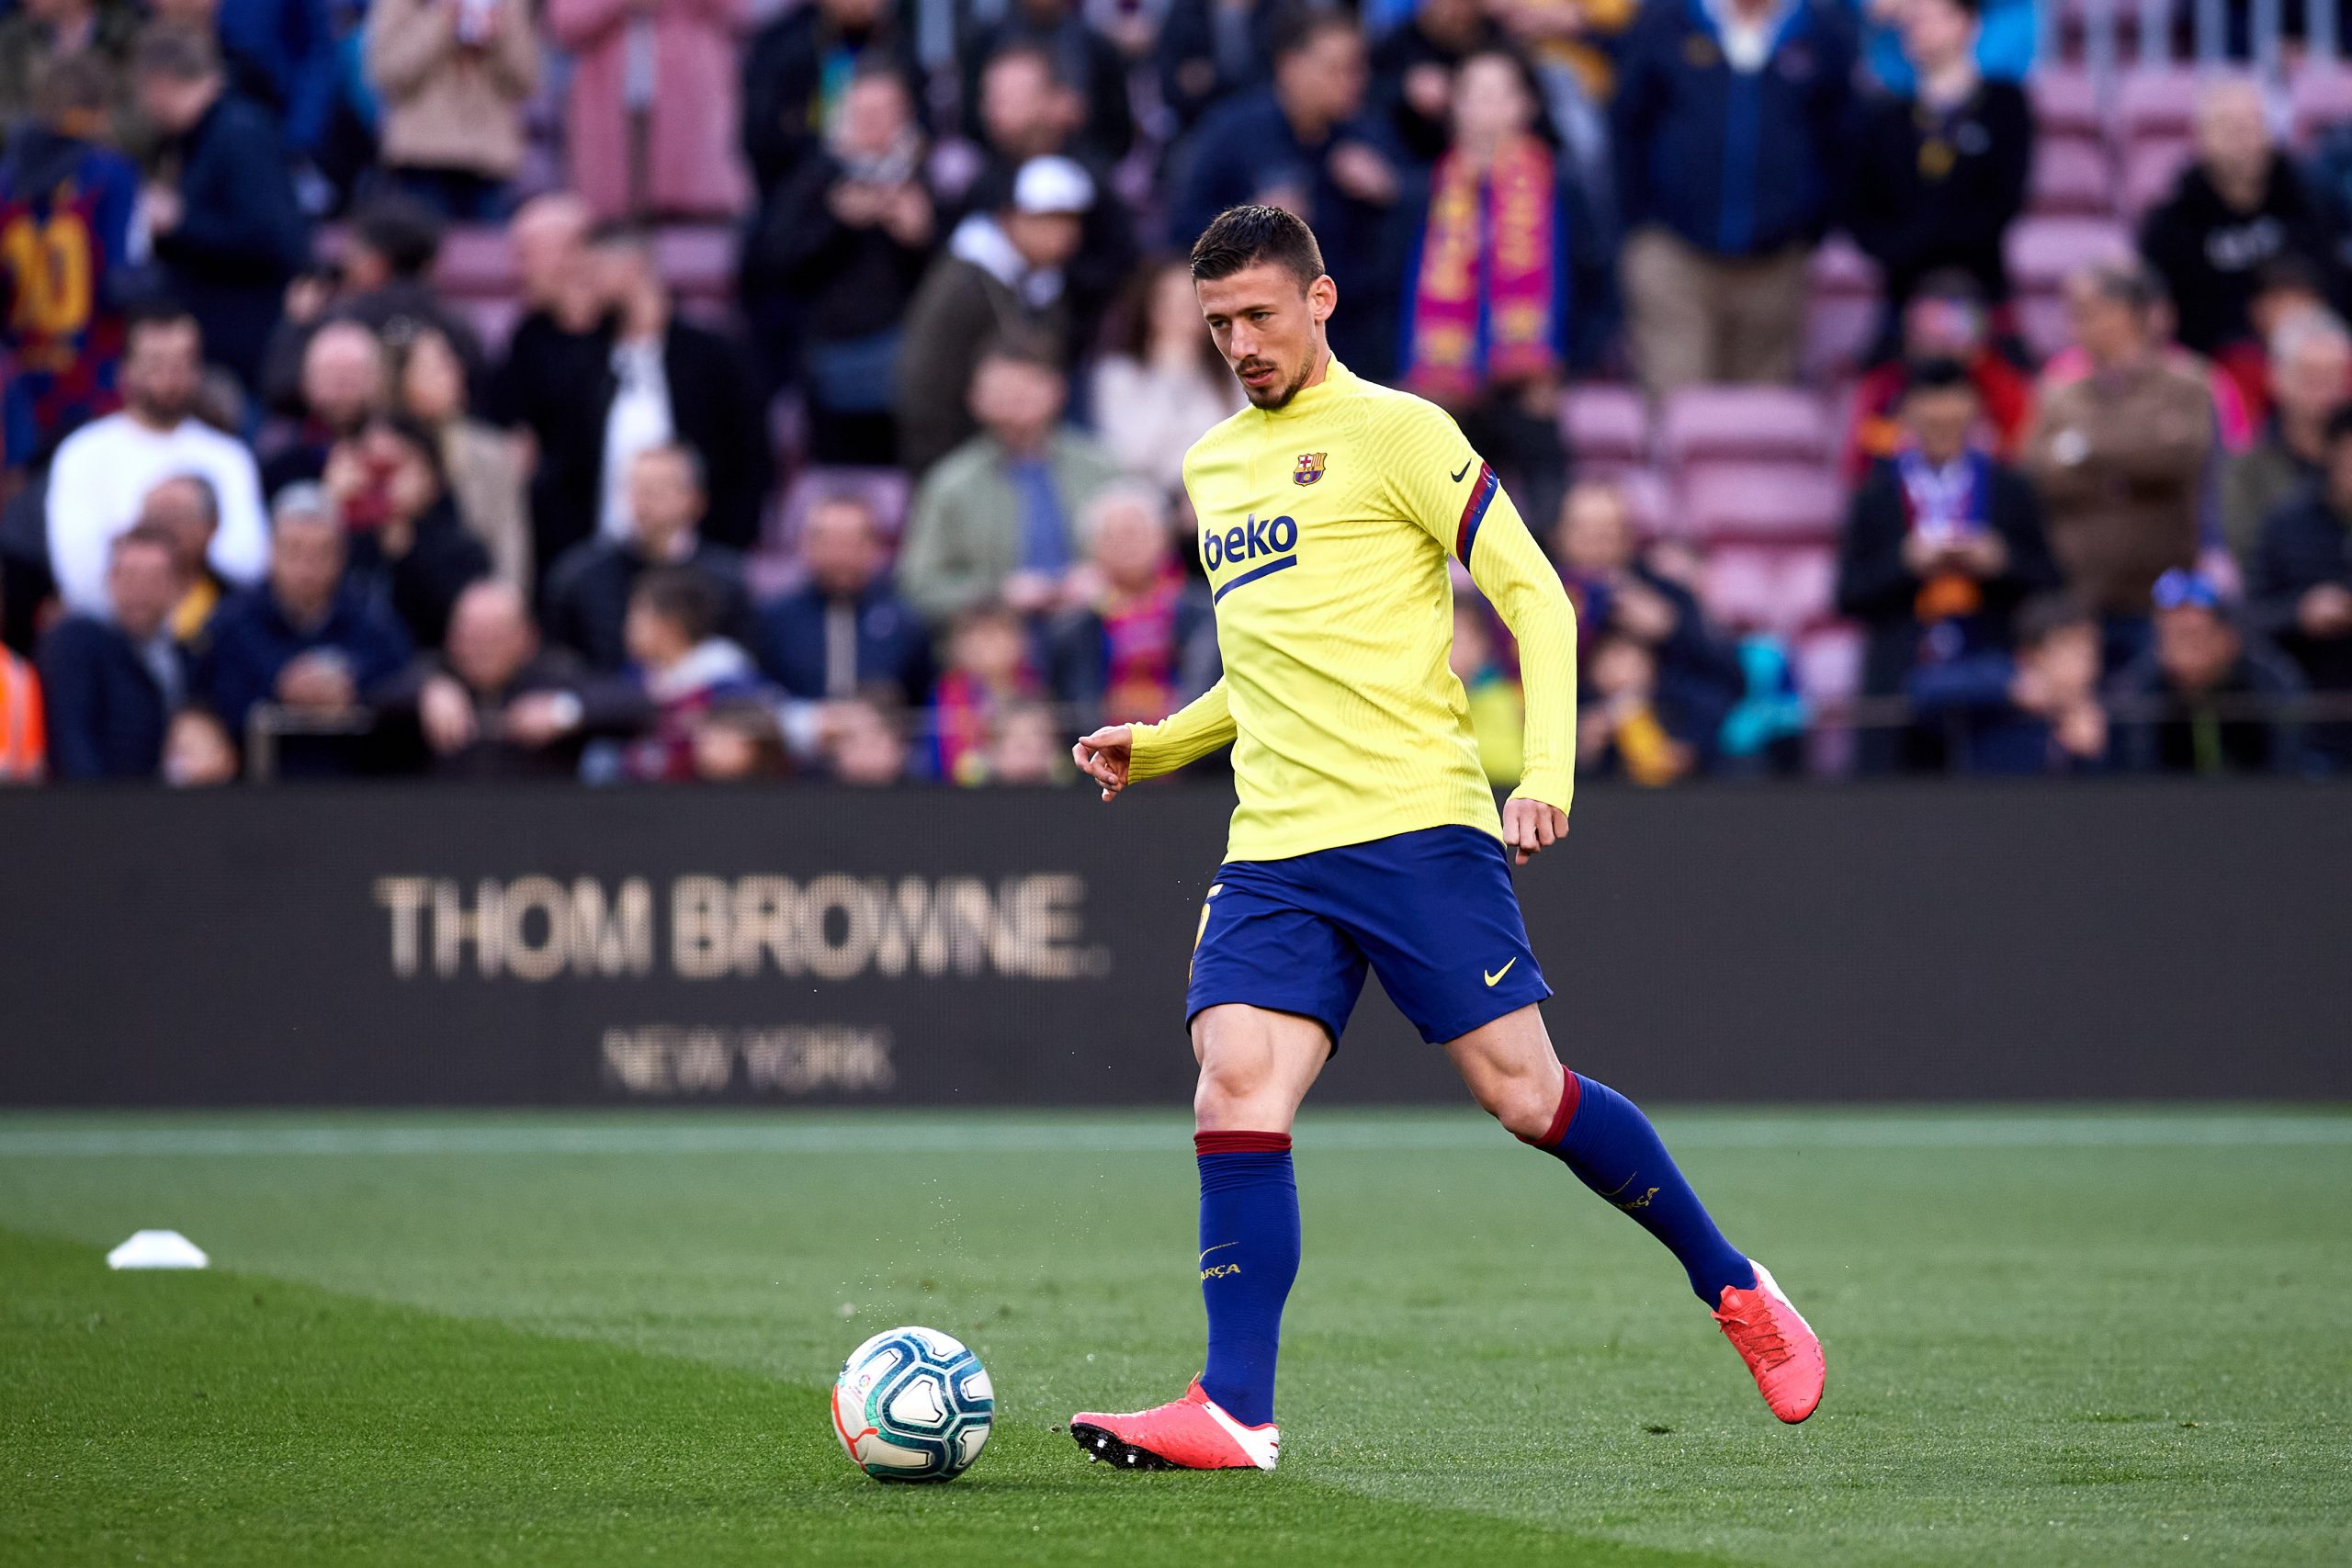 Barcelona looking to extend Clement Lenglet's contract (Lenglet is in action in the photo)